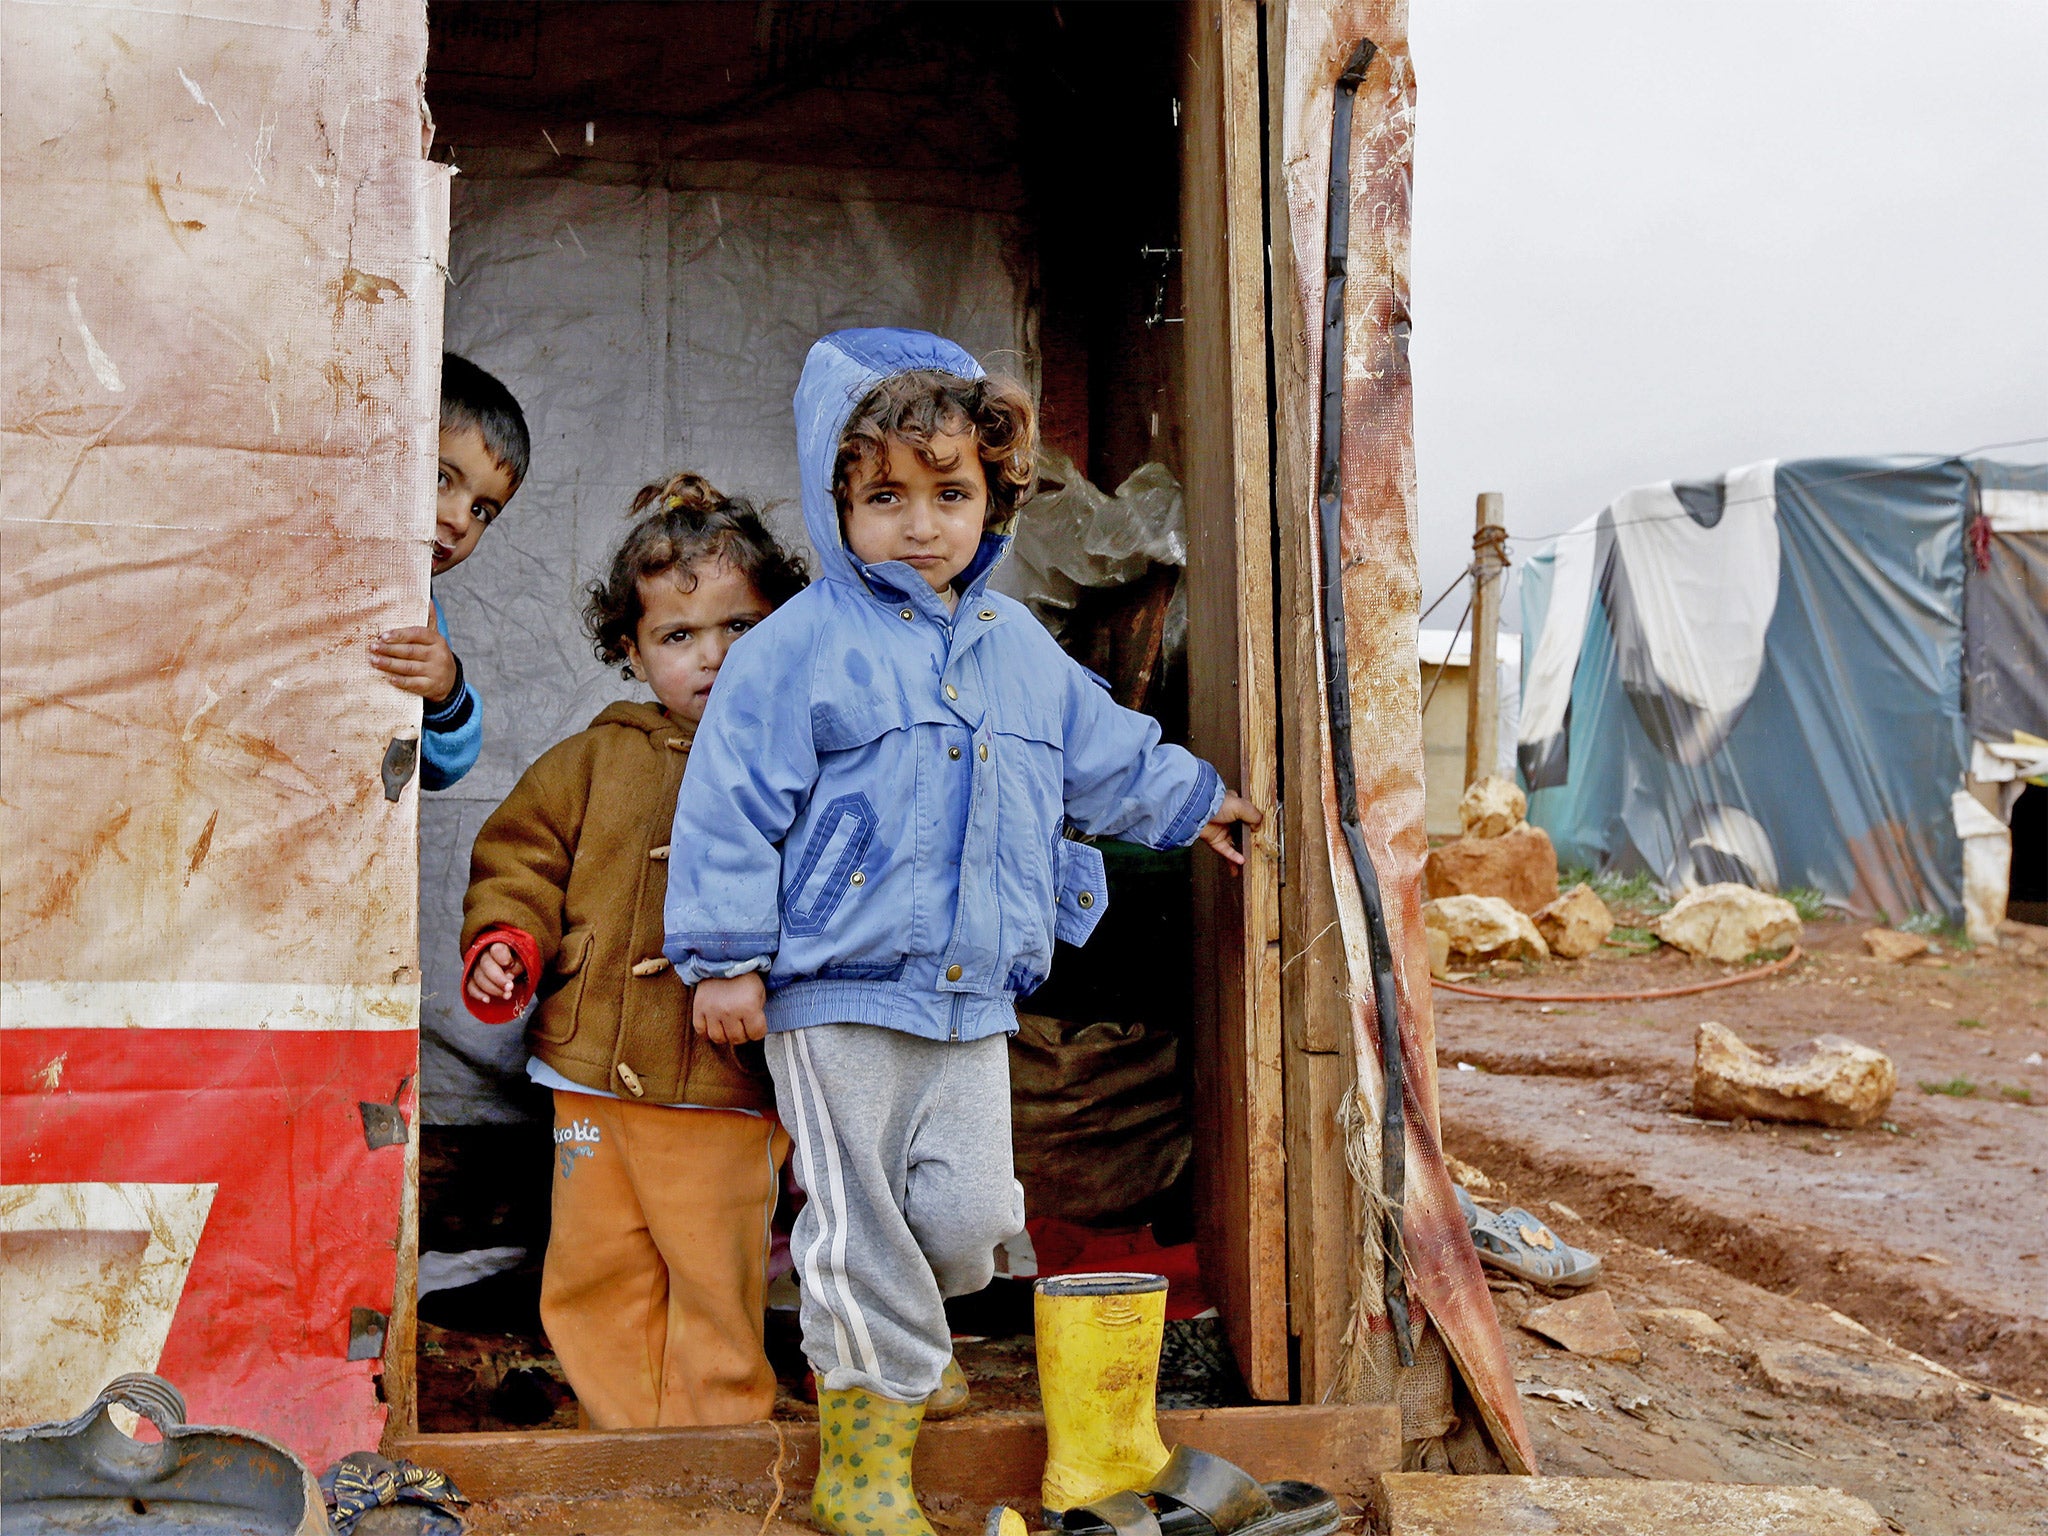 Children who fled the violence in the Syrian city of Aleppo play at a refugee camp in Jabaa, in Lebanon’s Bekaa Valley